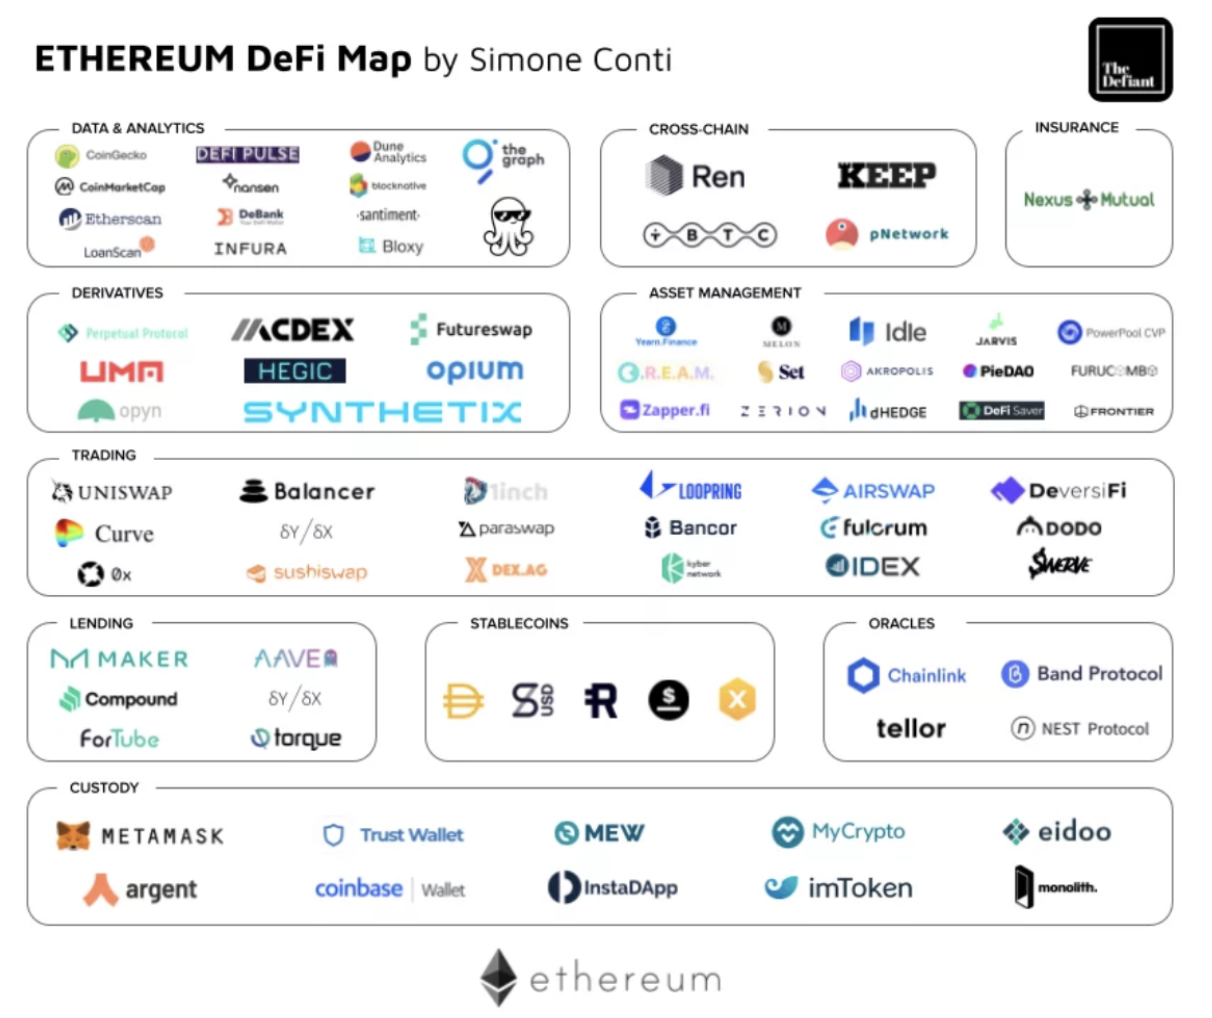 Ethereum is the most mature DeFi ecosystem with a total of $160B total value locked (TVL). The next highest ecosystem is Terra at $20B. Source: The Defiant